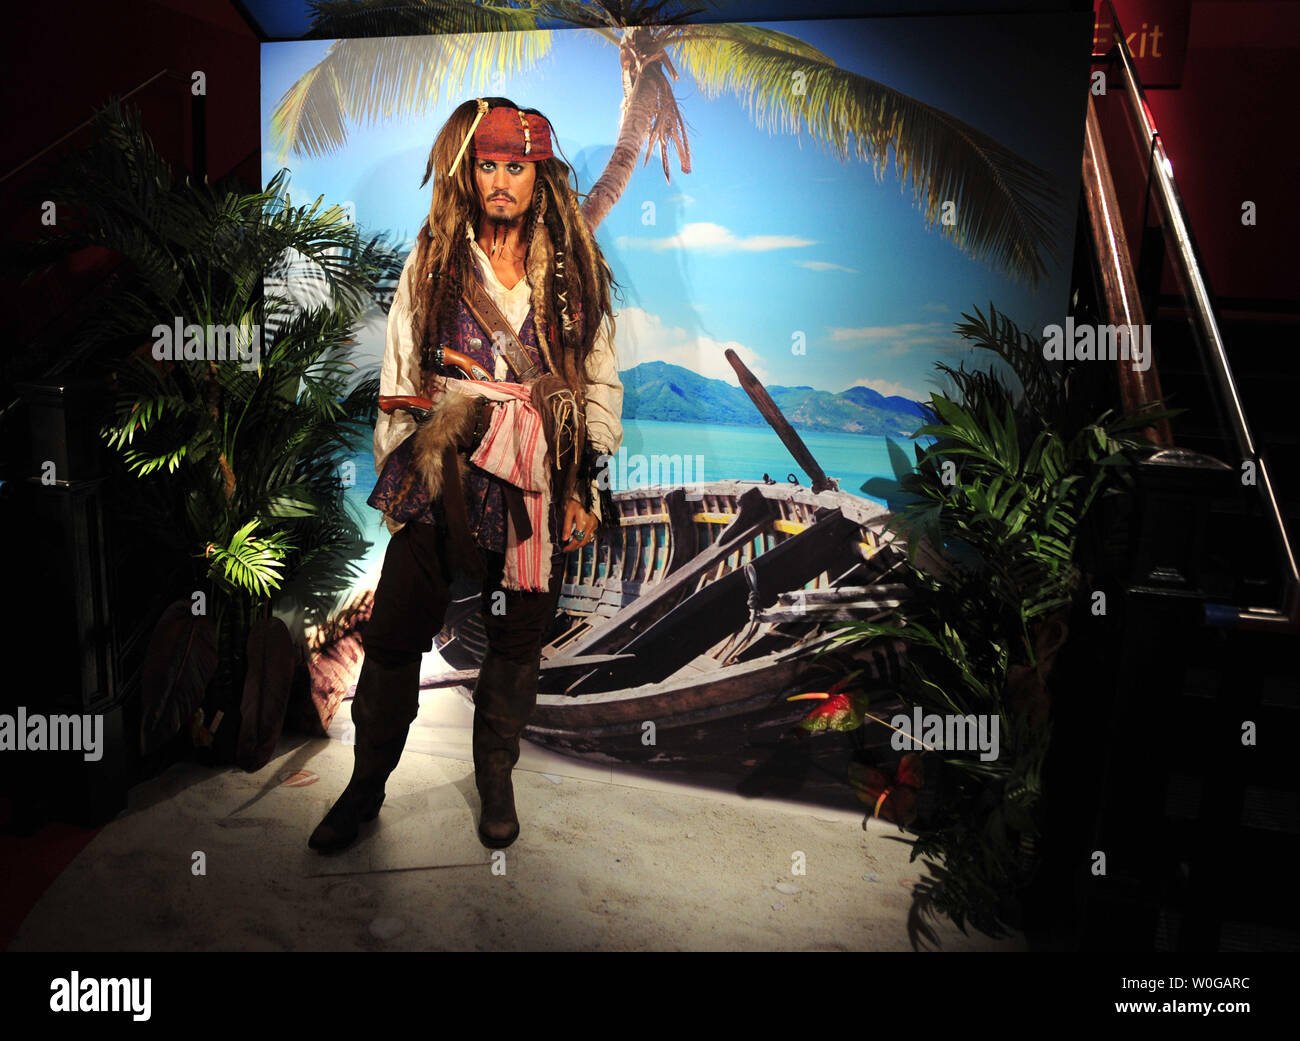 Madame Tussauds Wax Museum unveils a wax figure of Johnny Depp as Captain Jack Sparrow in celebration of the release of 'Pirates of the Caribbean: On Stranger Tides' in Washington on May 12, 2011.  UPI/Kevin Dietsch Stock Photo